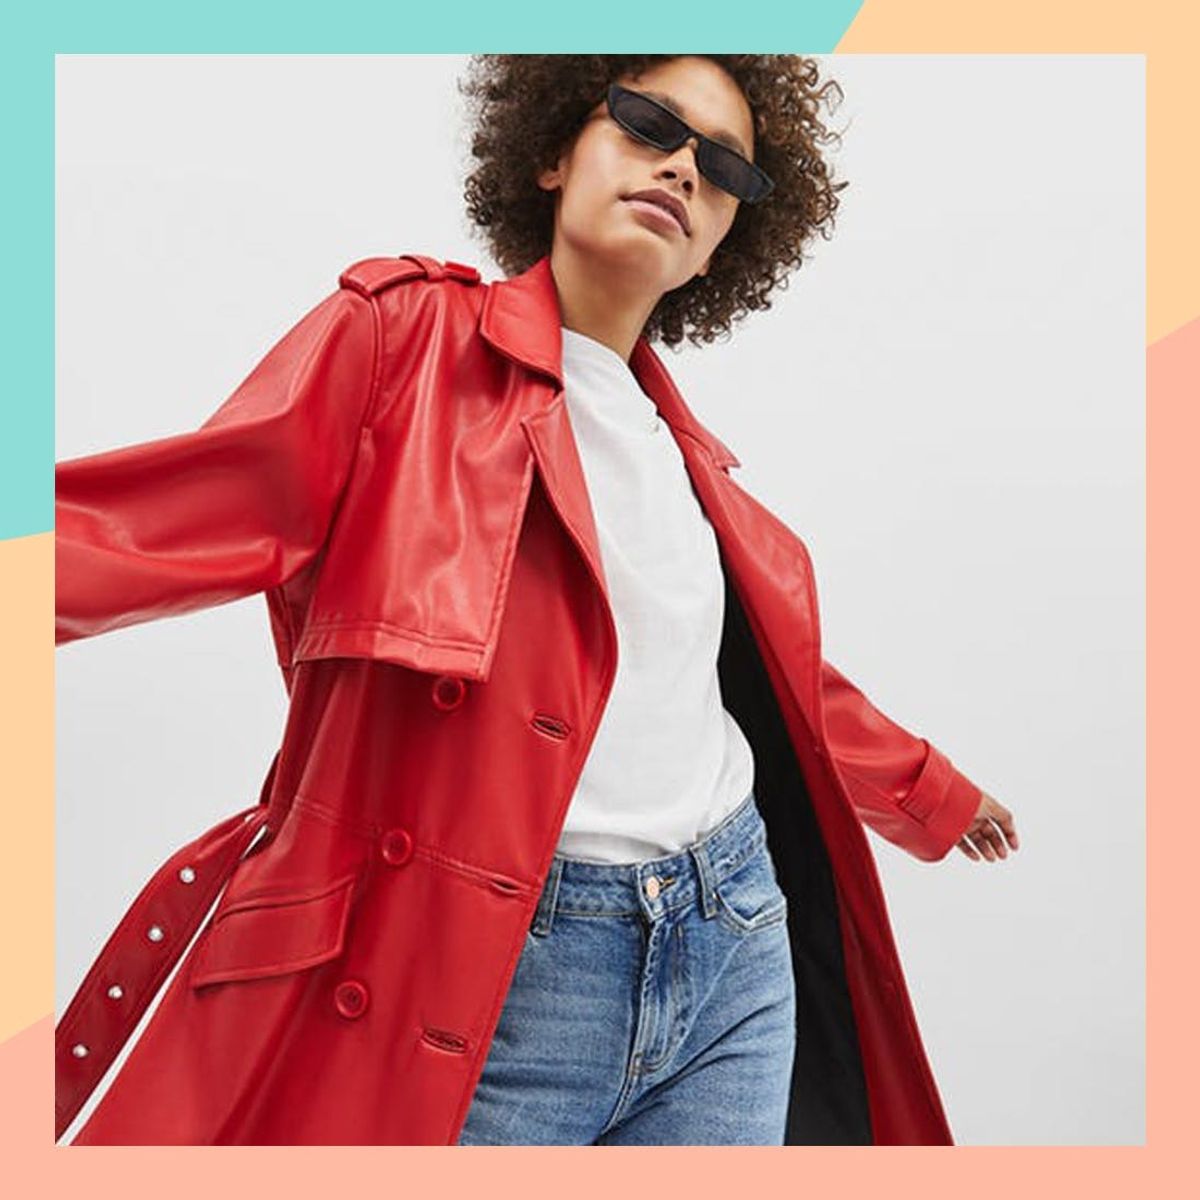 19 Not-So-Basic Spring Trench Coats Under $150 - Brit + Co